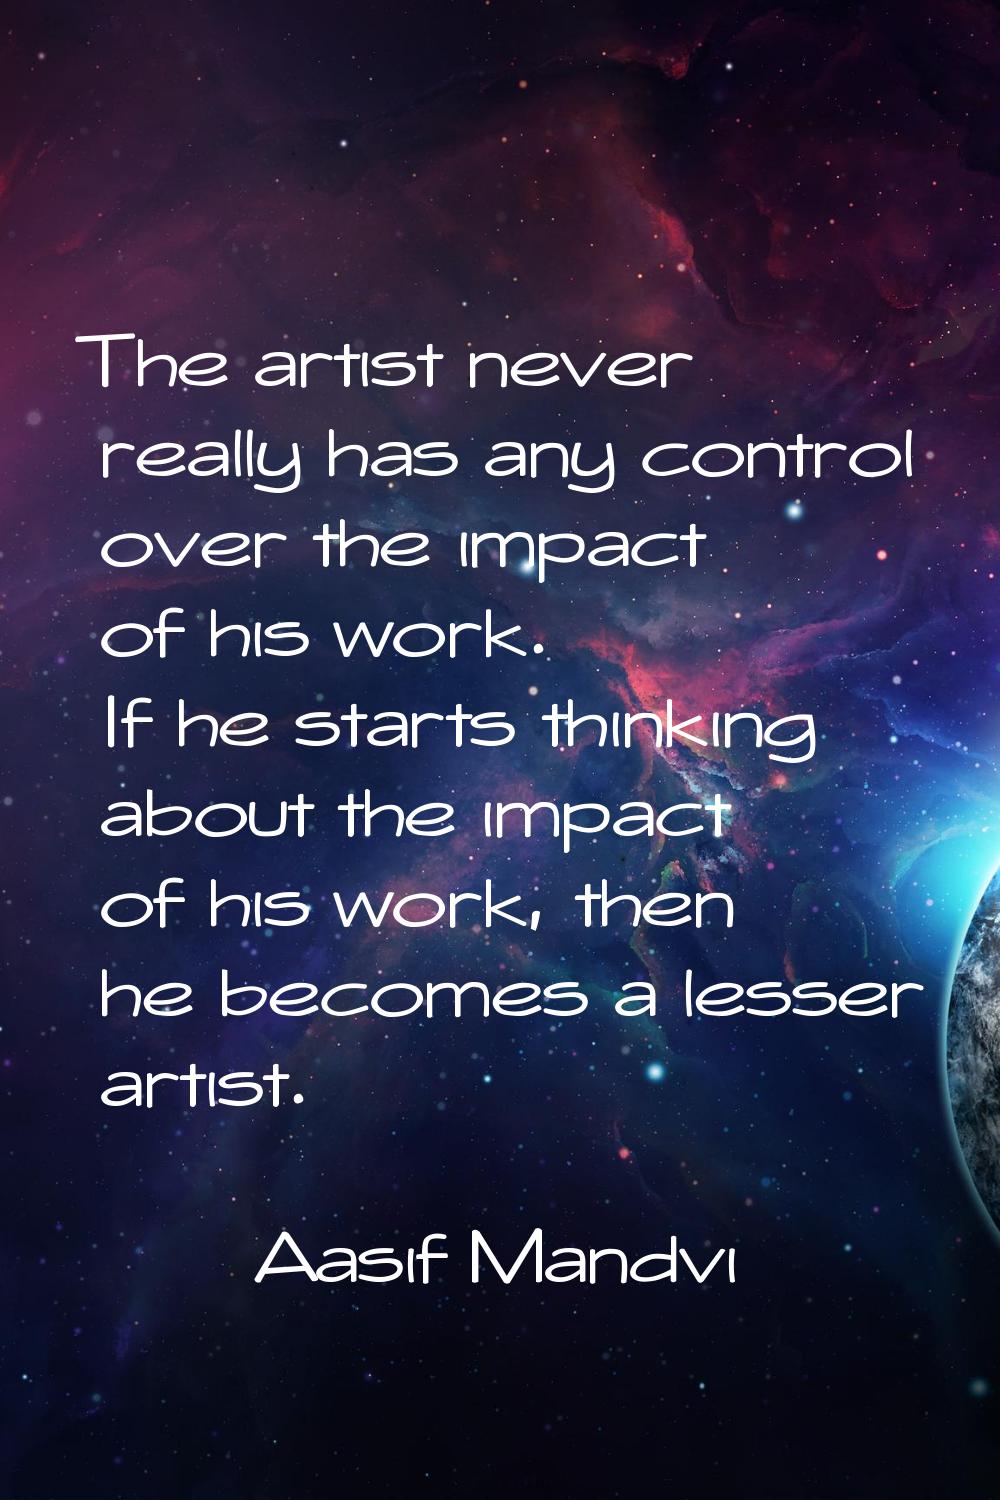 The artist never really has any control over the impact of his work. If he starts thinking about th